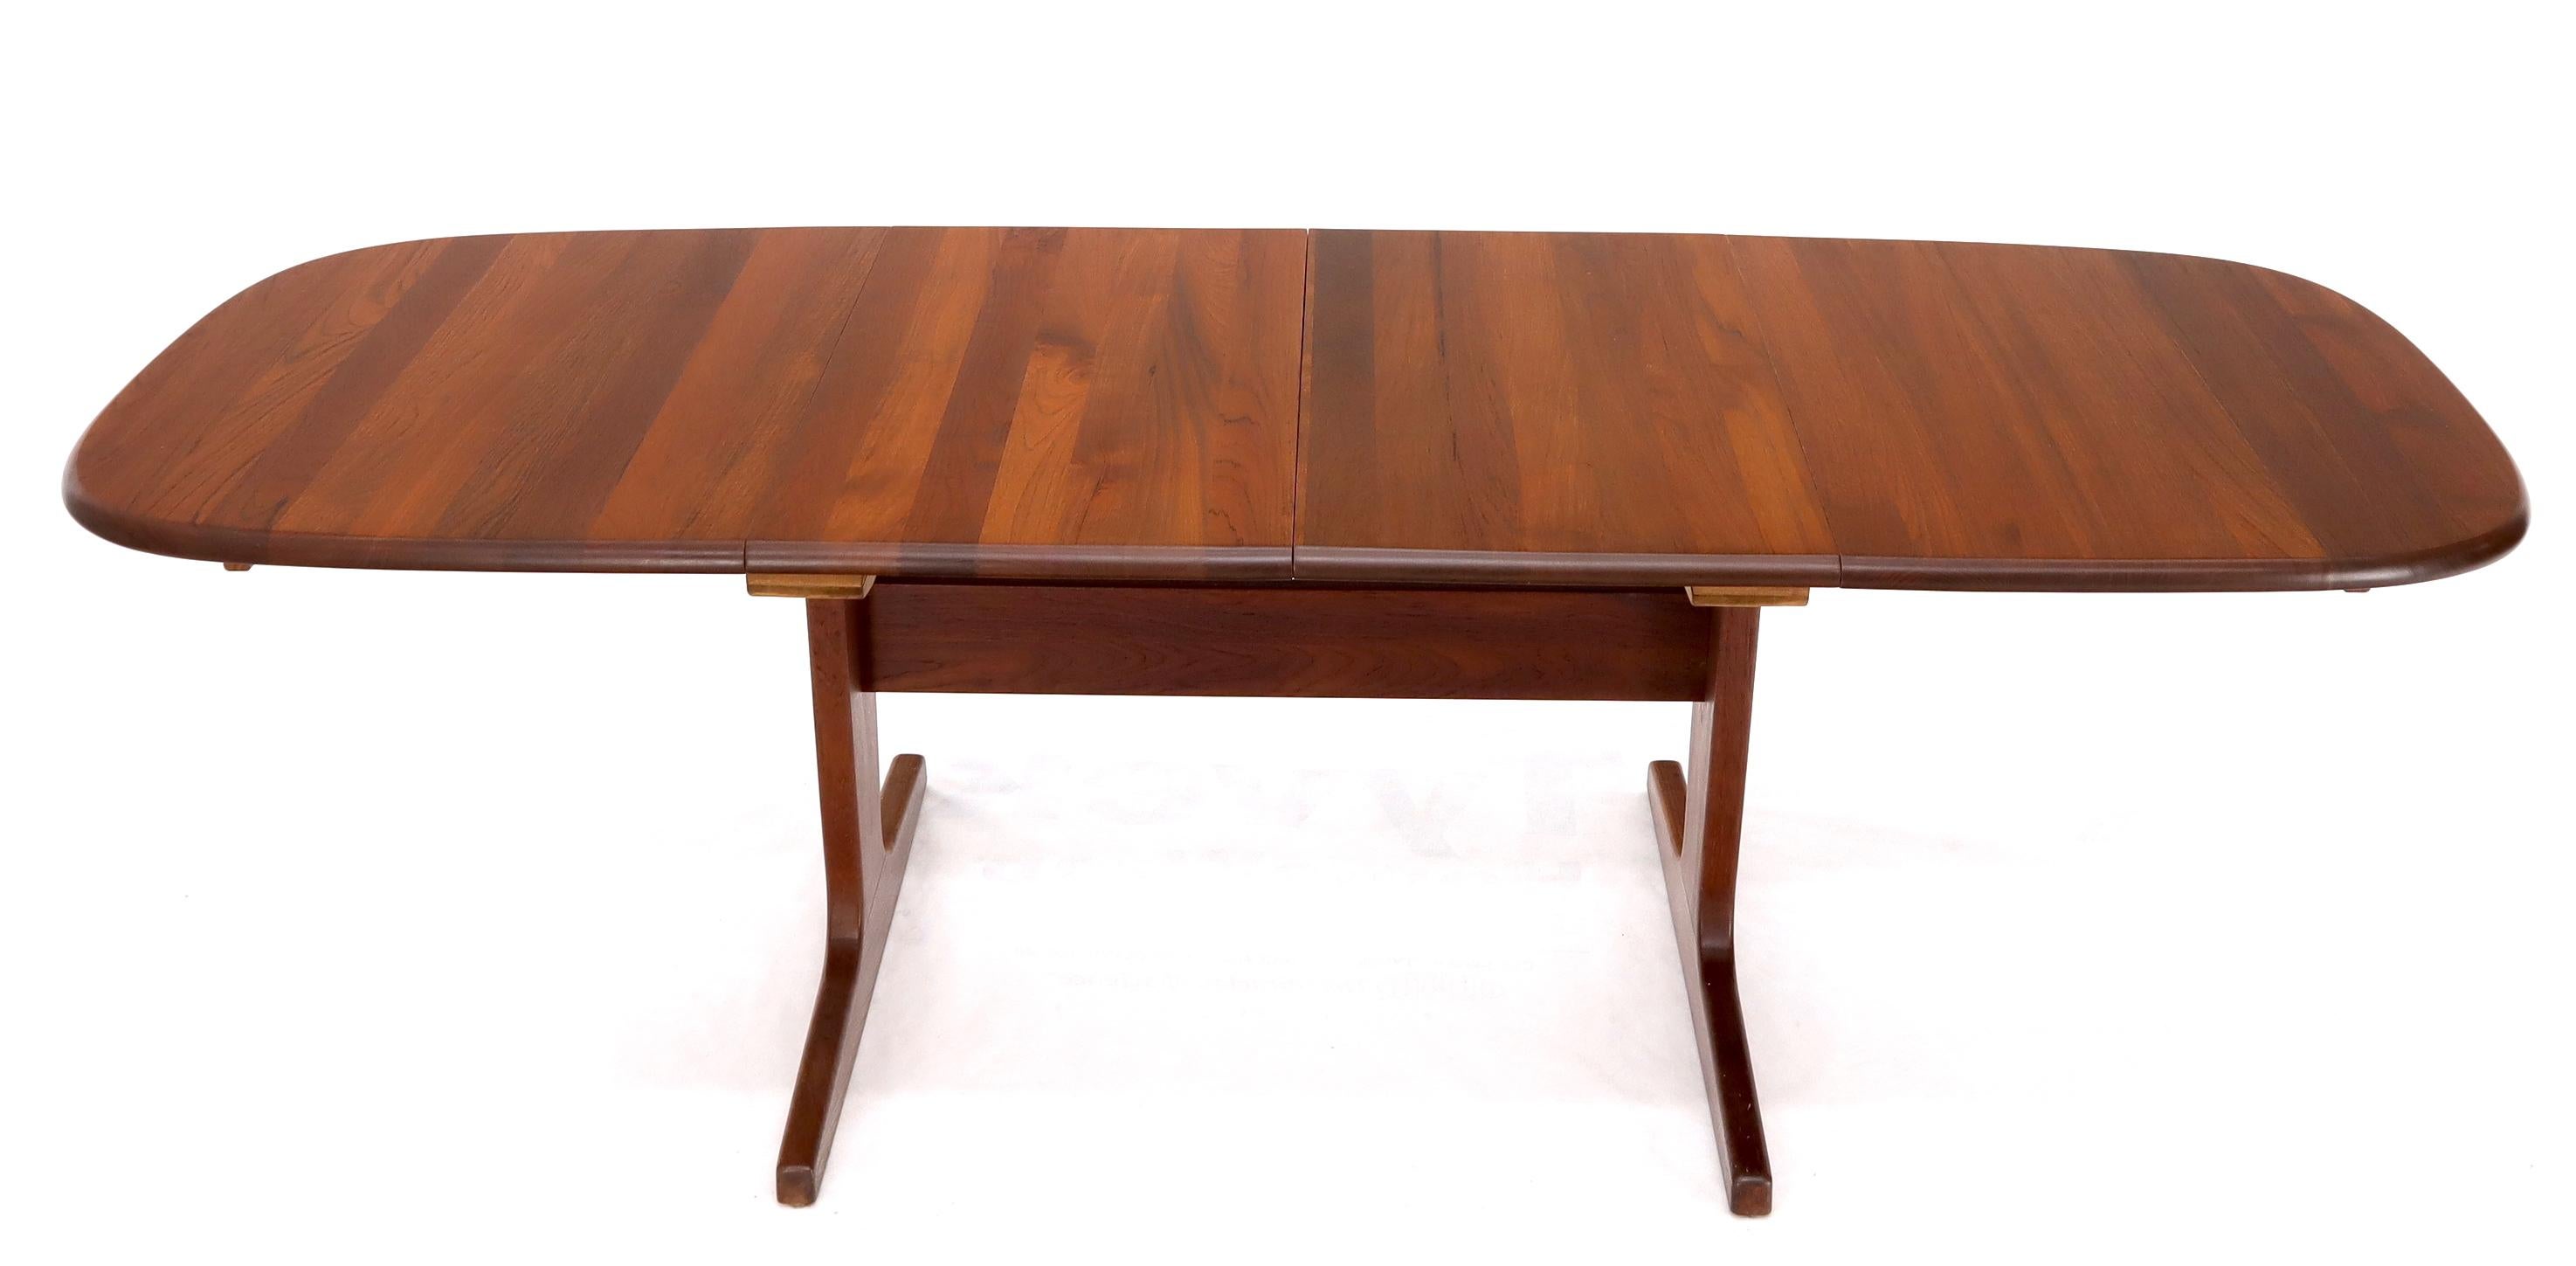 Compact Solid Teak Danish Mid-Century Modern Dining Table with Two Leaves For Sale 4